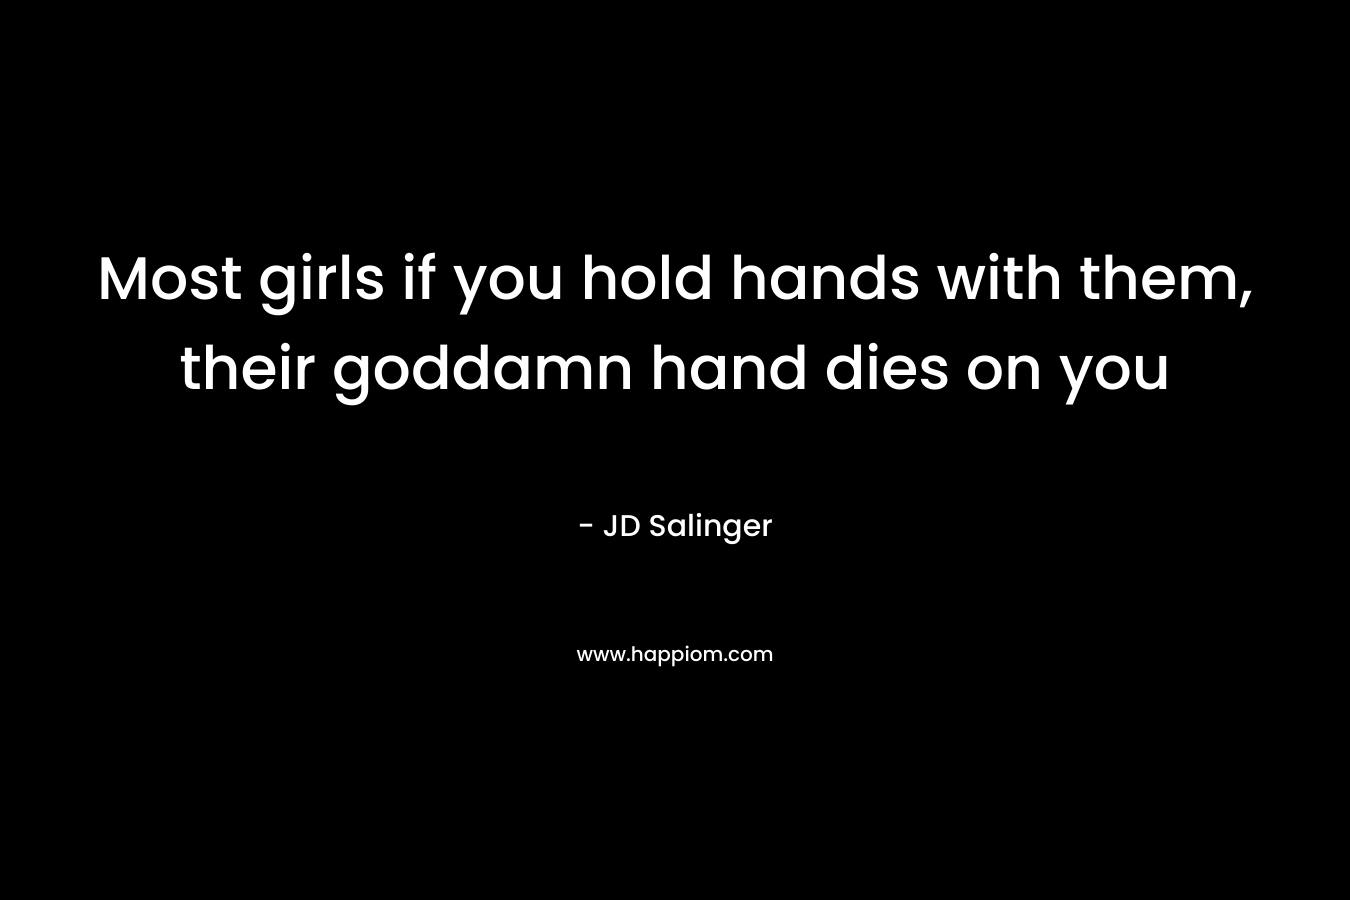 Most girls if you hold hands with them, their goddamn hand dies on you